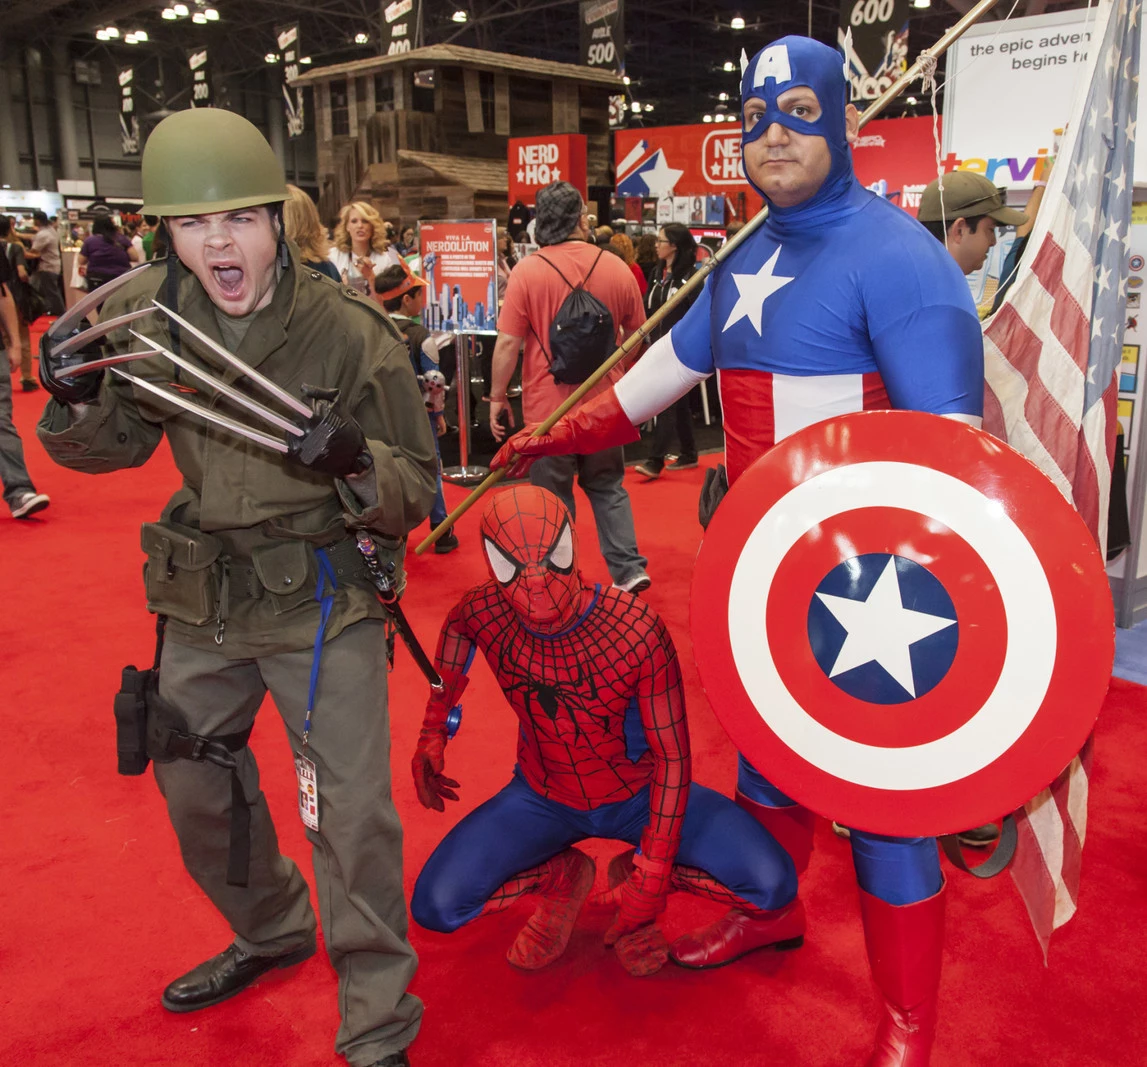 Cosplayers, fans to descend upon DeVos Place for Grand Rapids Comic Con |  The Rapidian